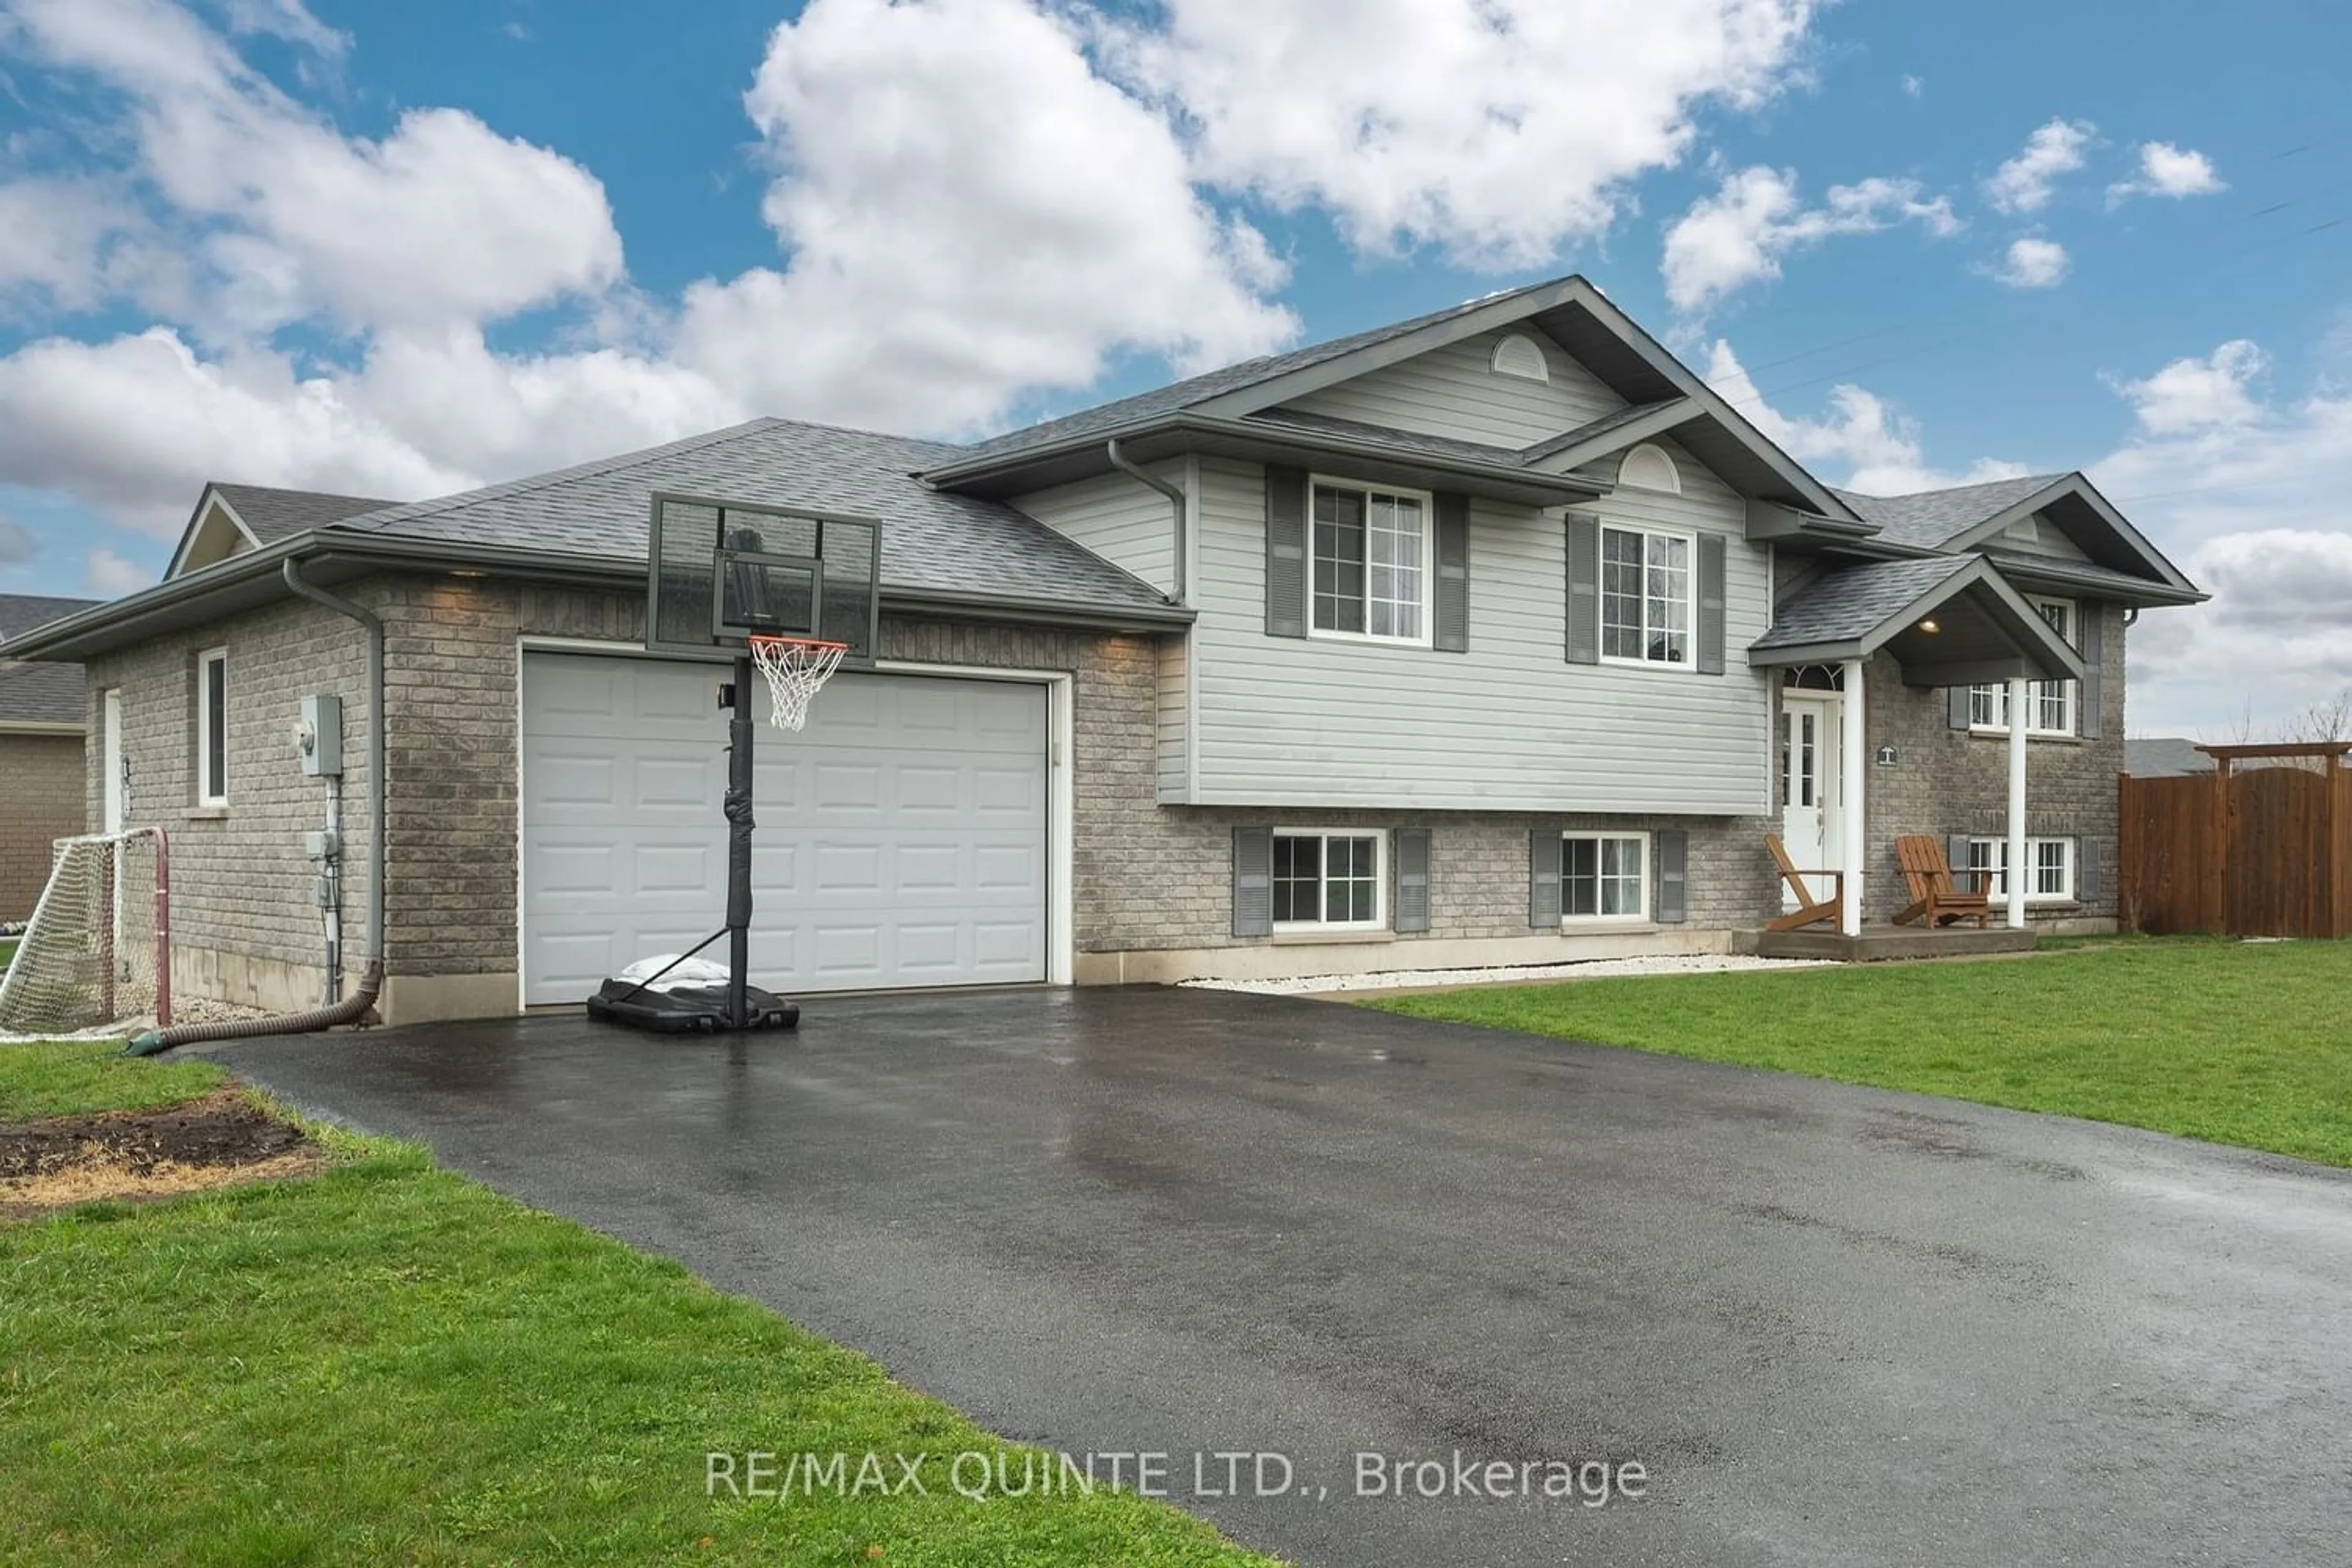 Frontside or backside of a home for 1 Ridgeview Lane, Quinte West Ontario K8V 5P8